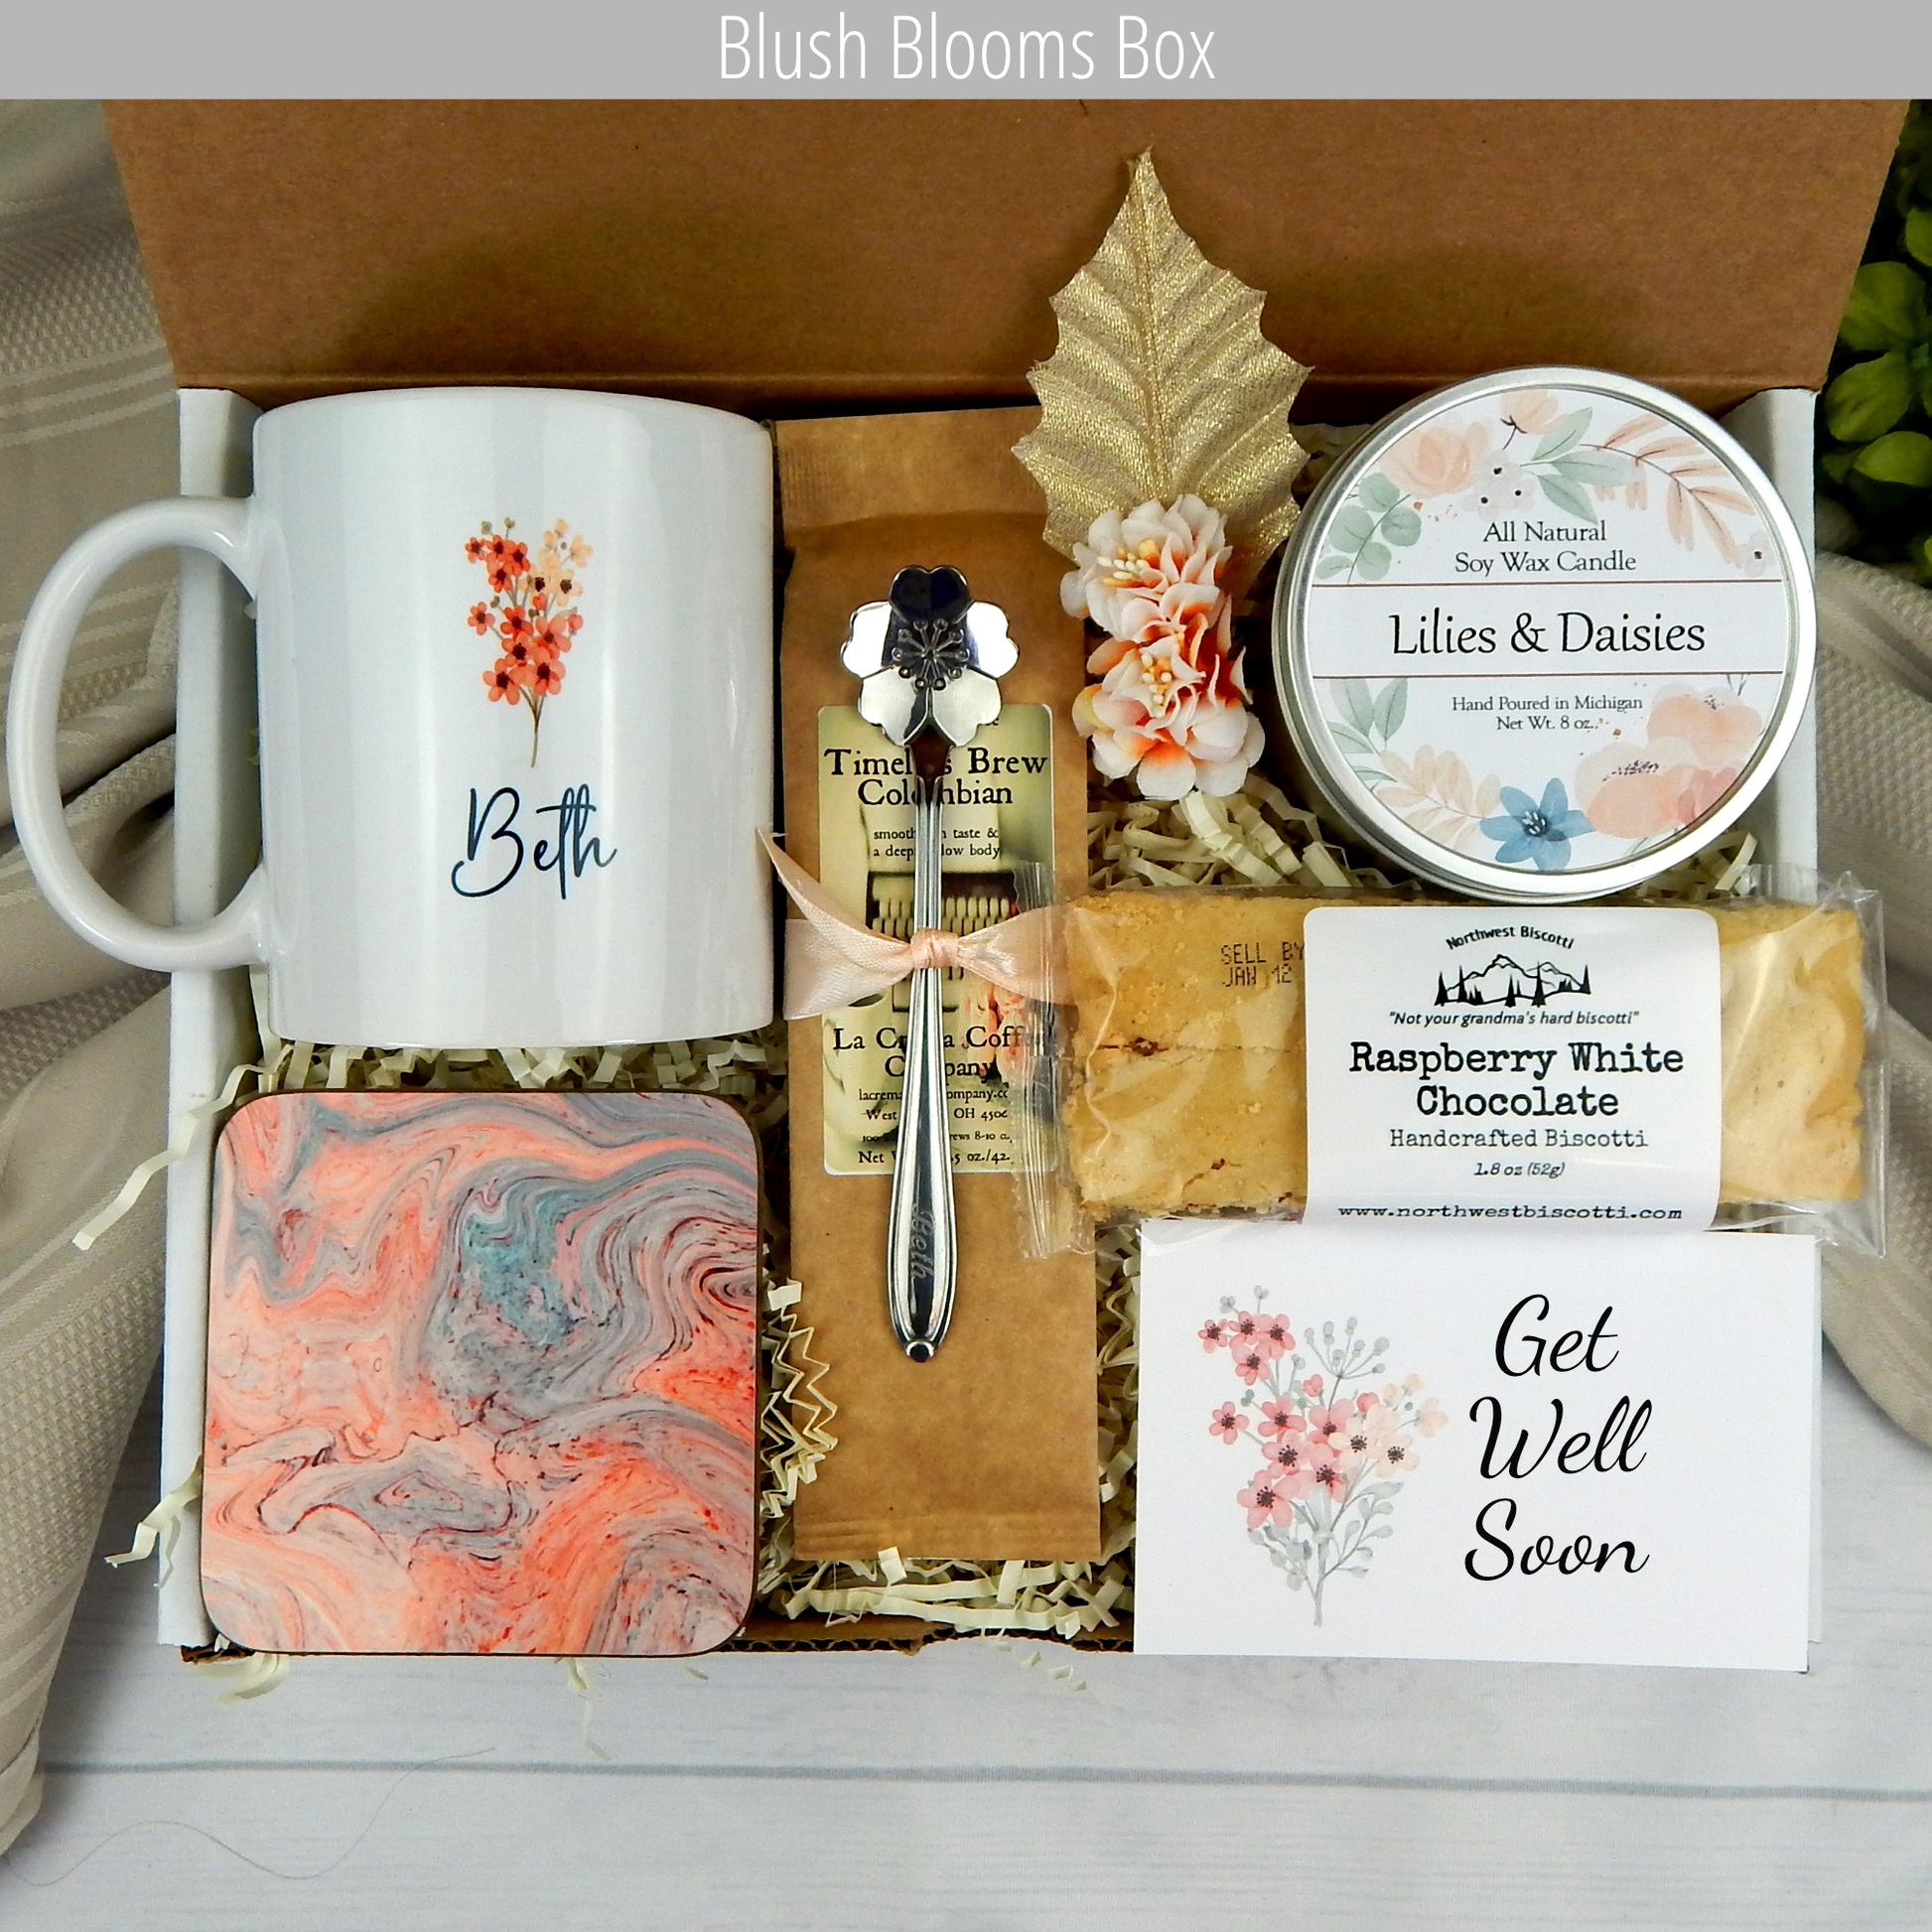 Get well wishes: Customized mug, coffee, and goodies in a gift basket for her.